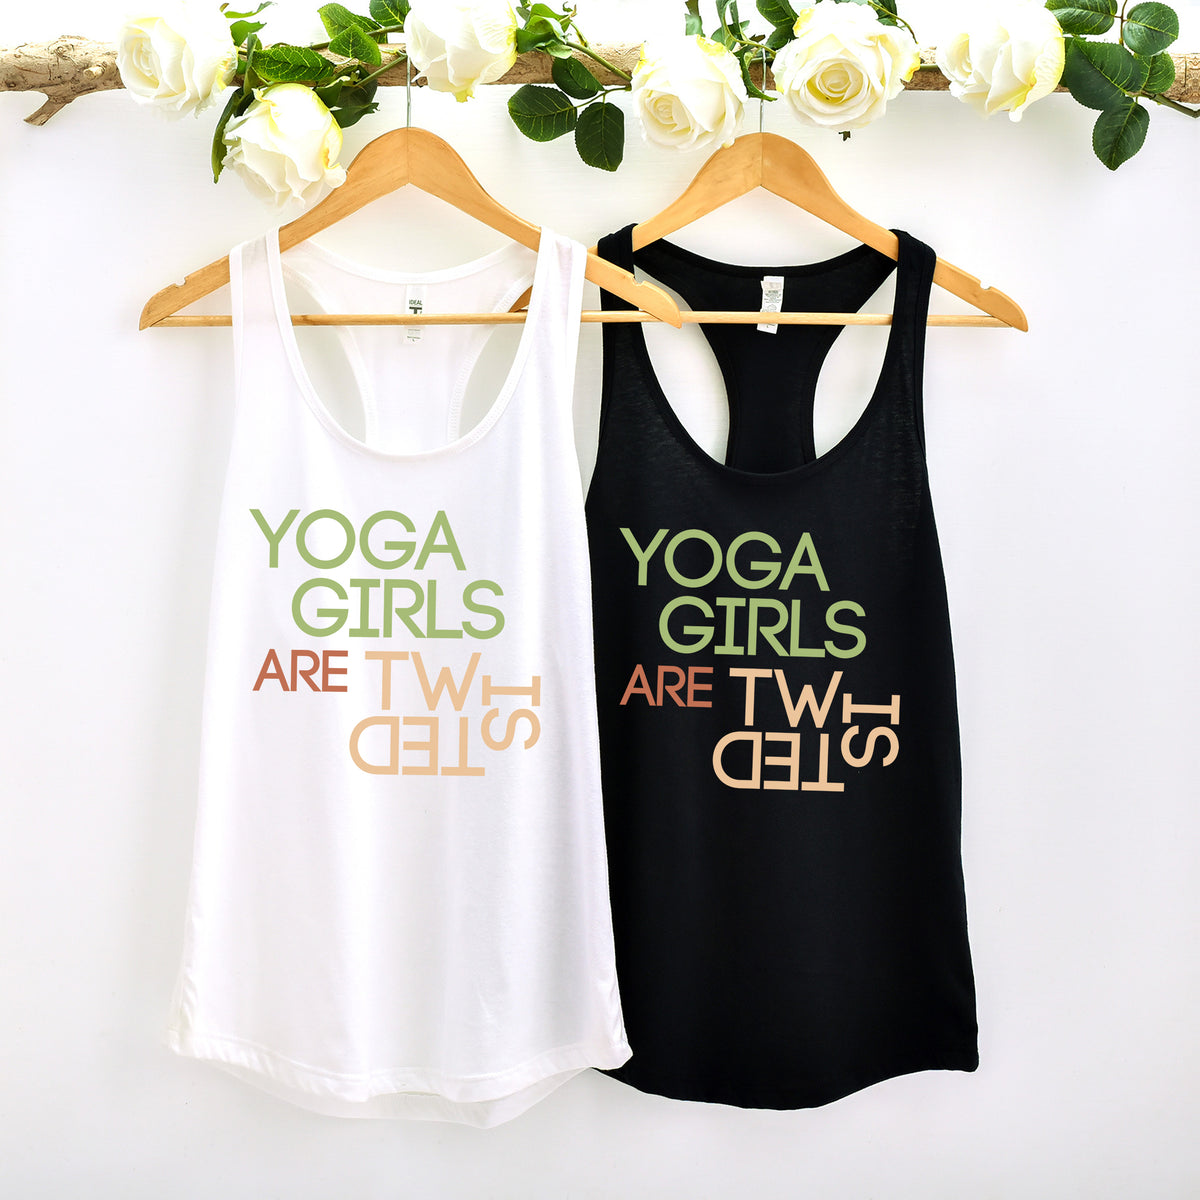 Yoga Girls Are Twisted Funny Yoga Shirt | White and Black Women's Racerback Tank Top